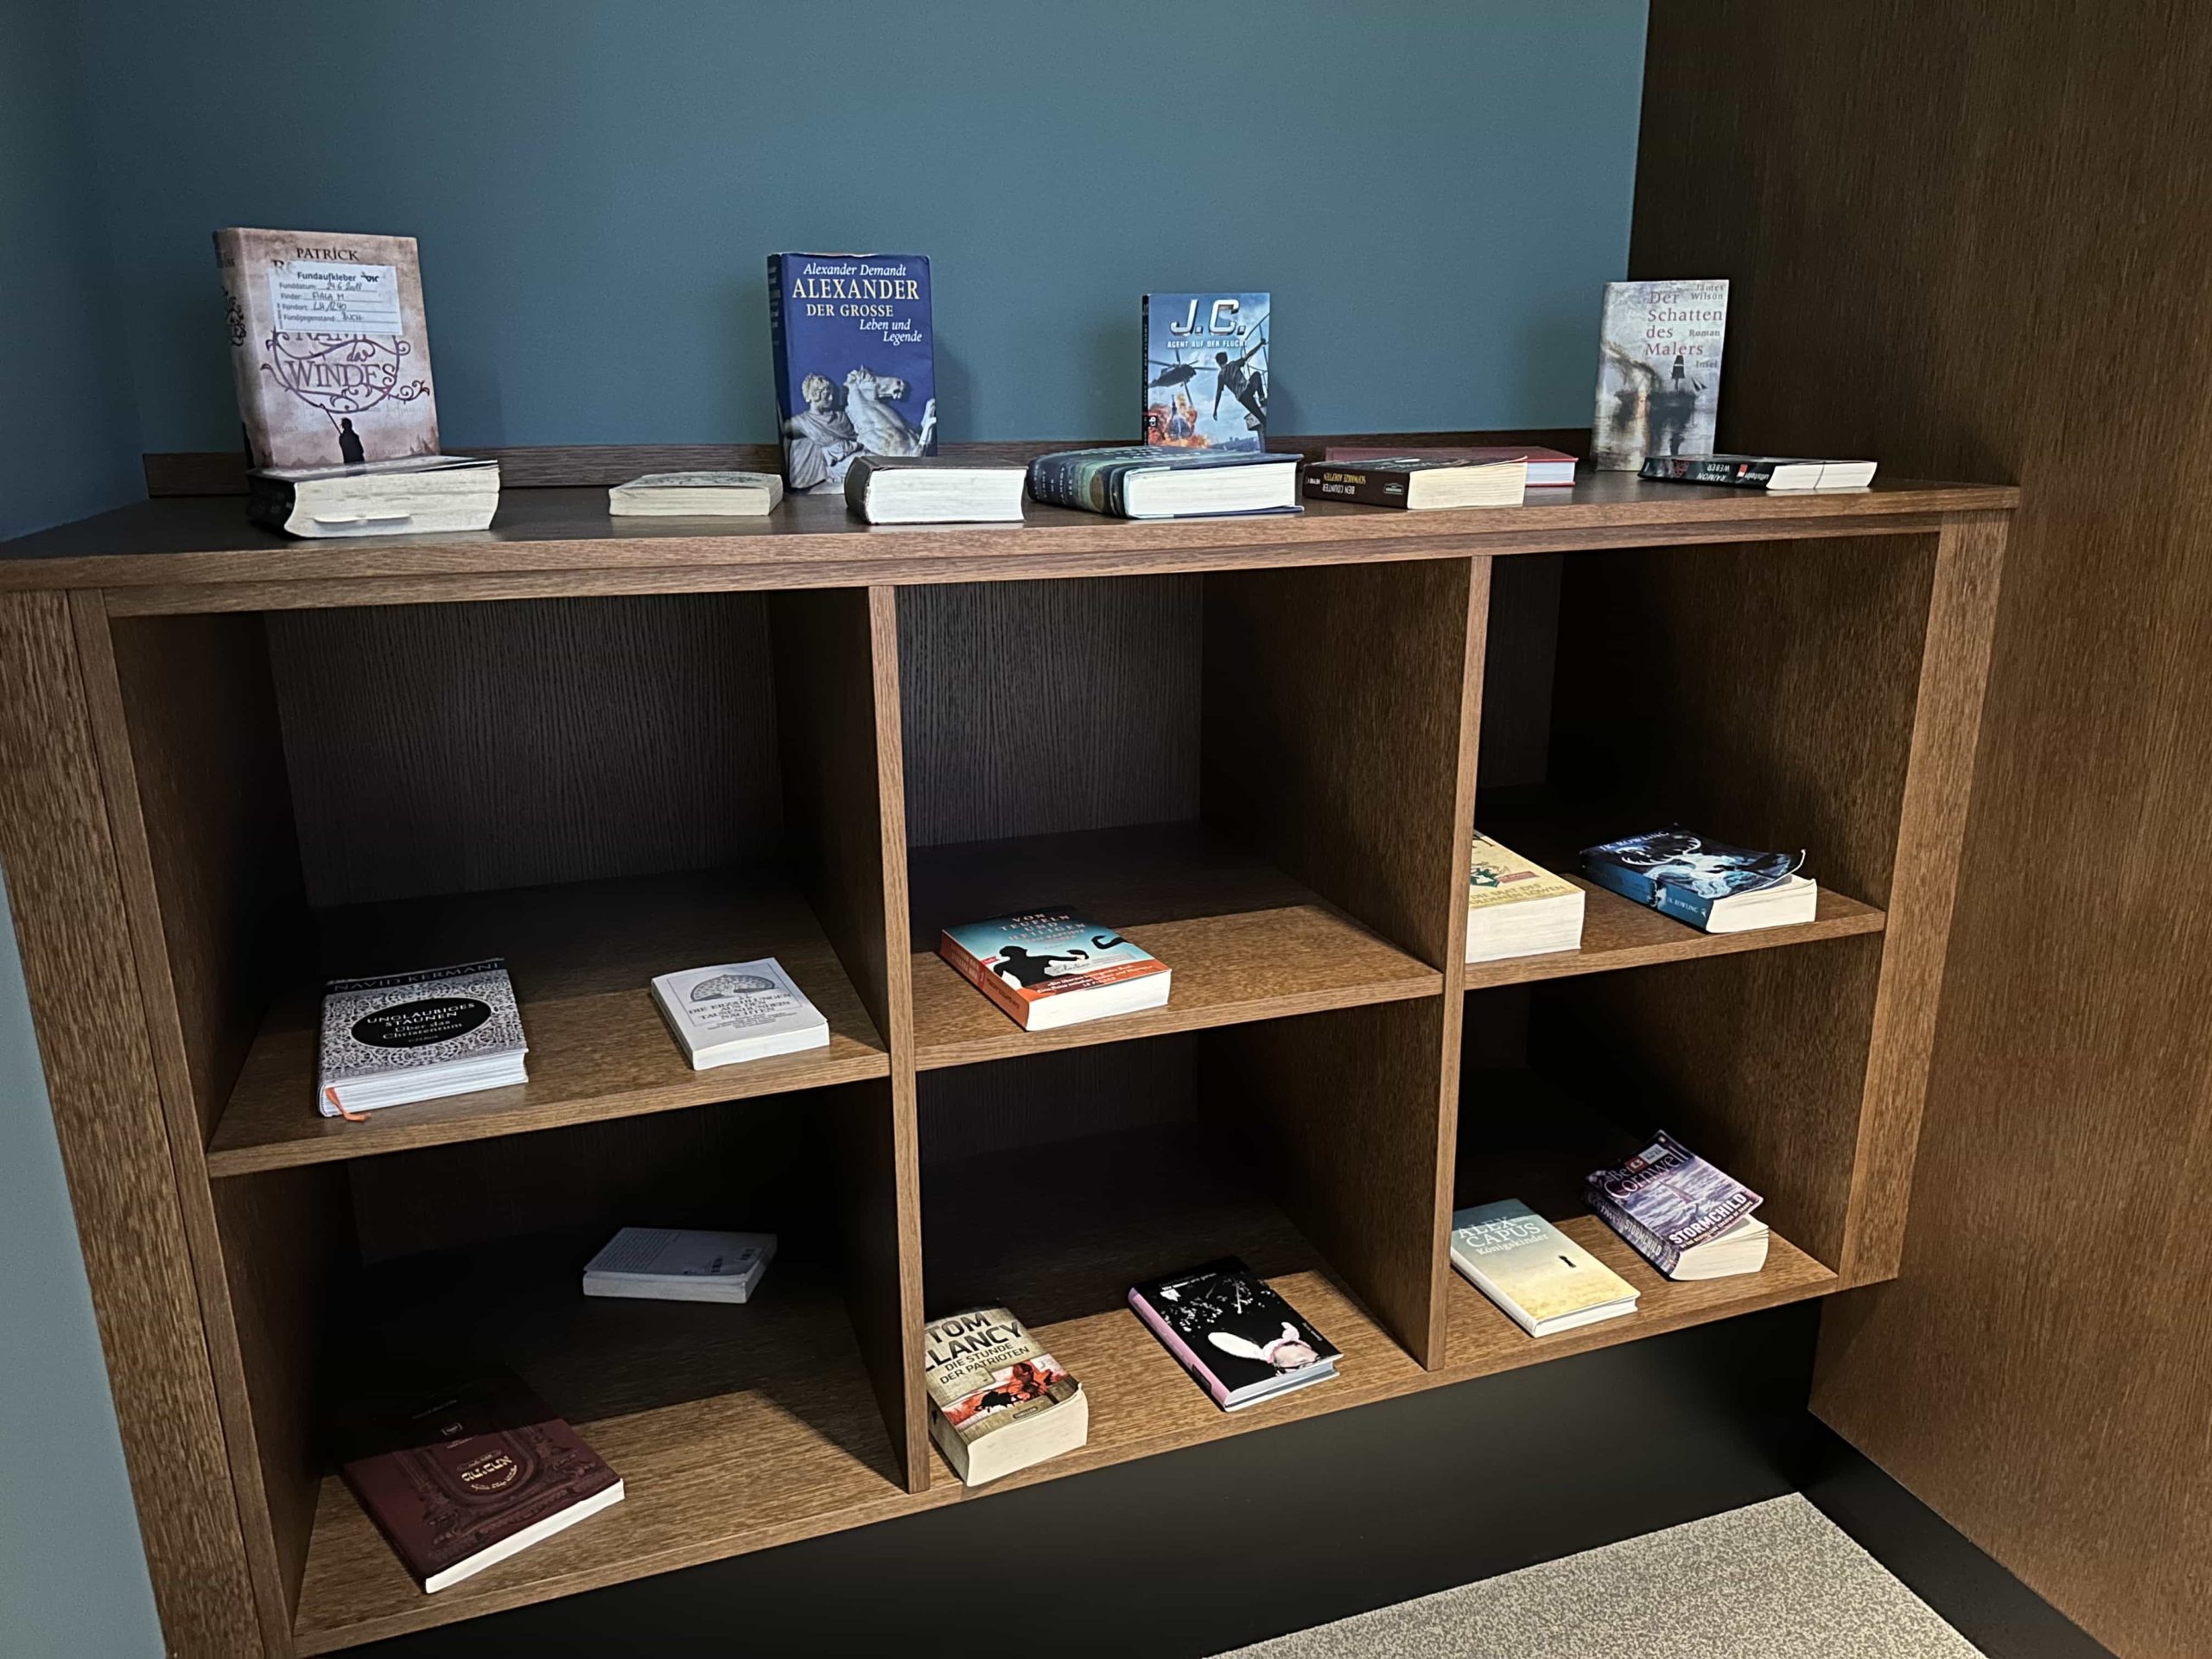 Bookshelves with an assortment of books for visitors of an airport lounge